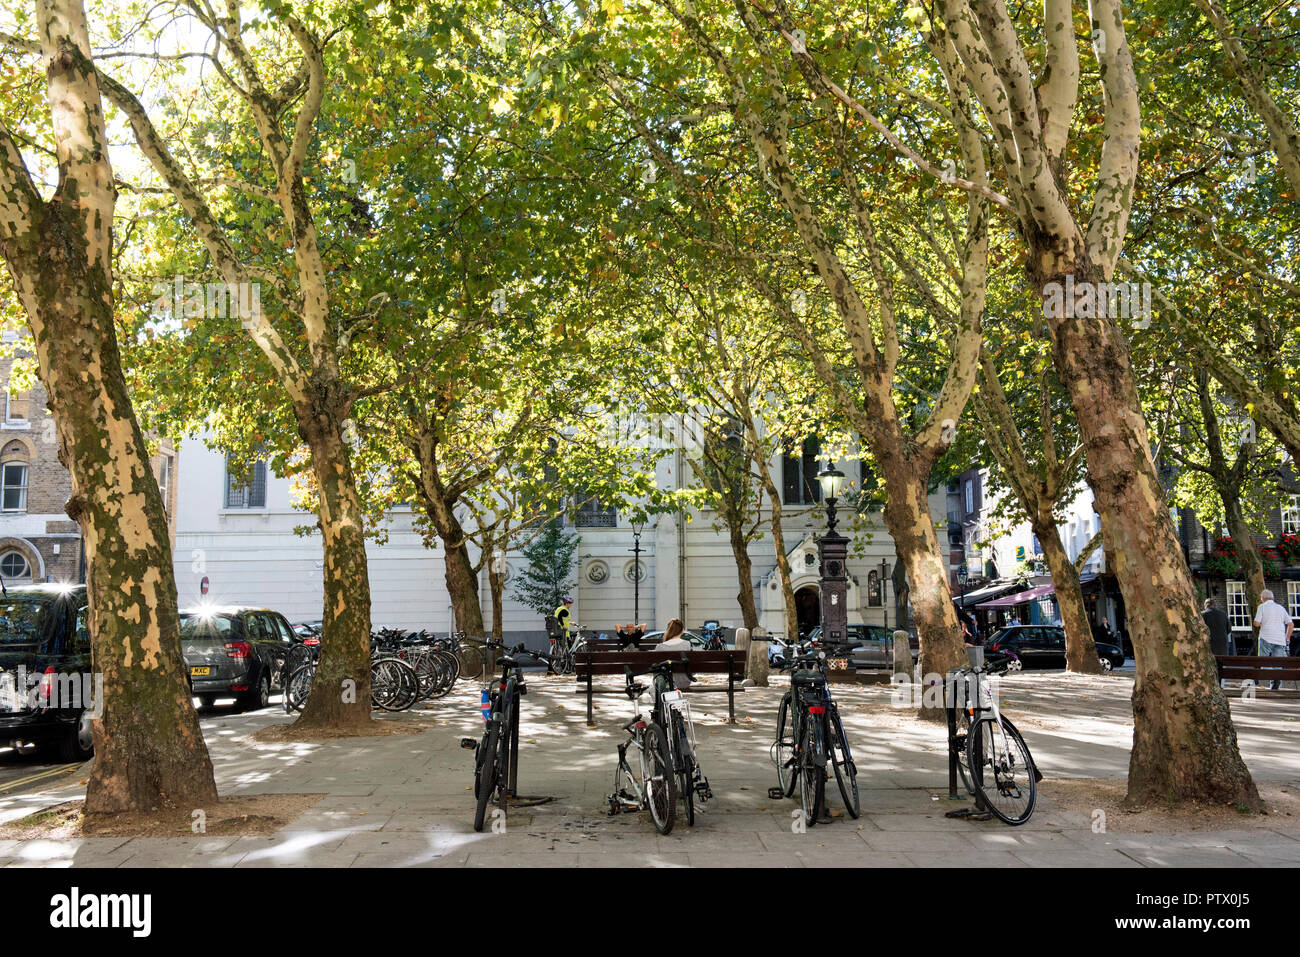 London Plane trees (Platanus x hispanica) and parked bicycles, Queen Square, Bloomsbury, London England Britain UK Stock Photo